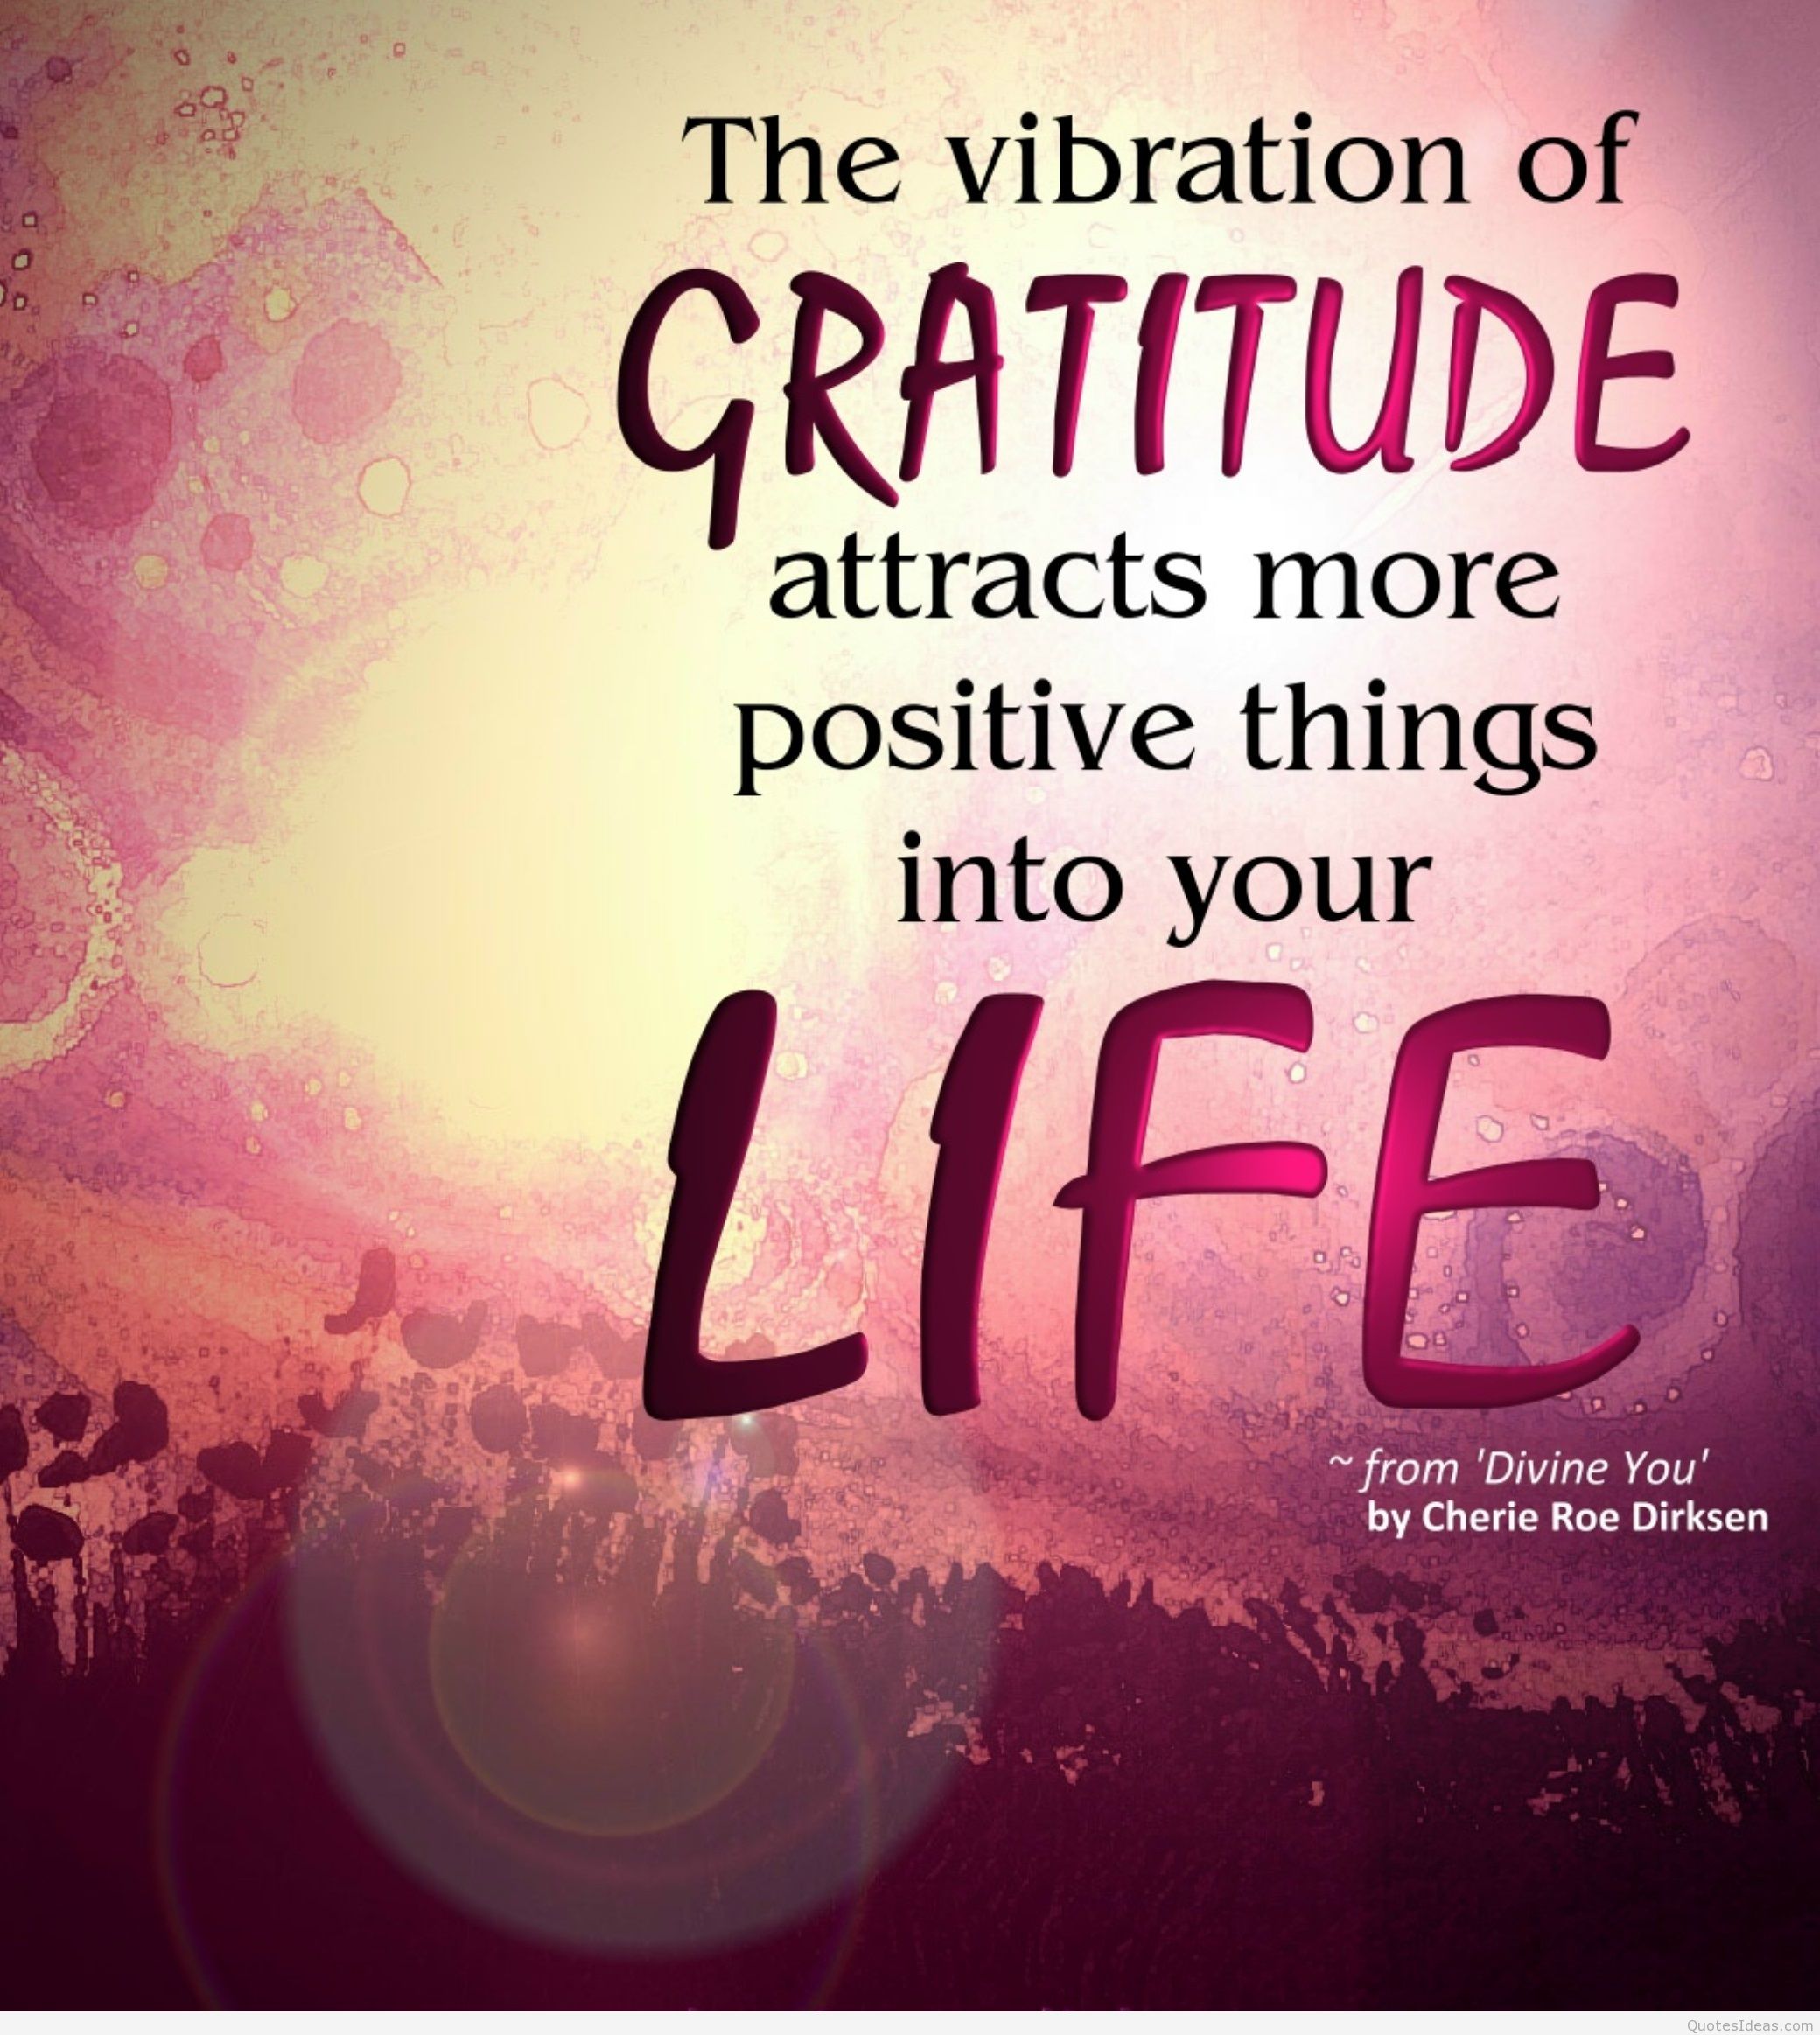 Grateful gratitude quotes sayings images wallpapers